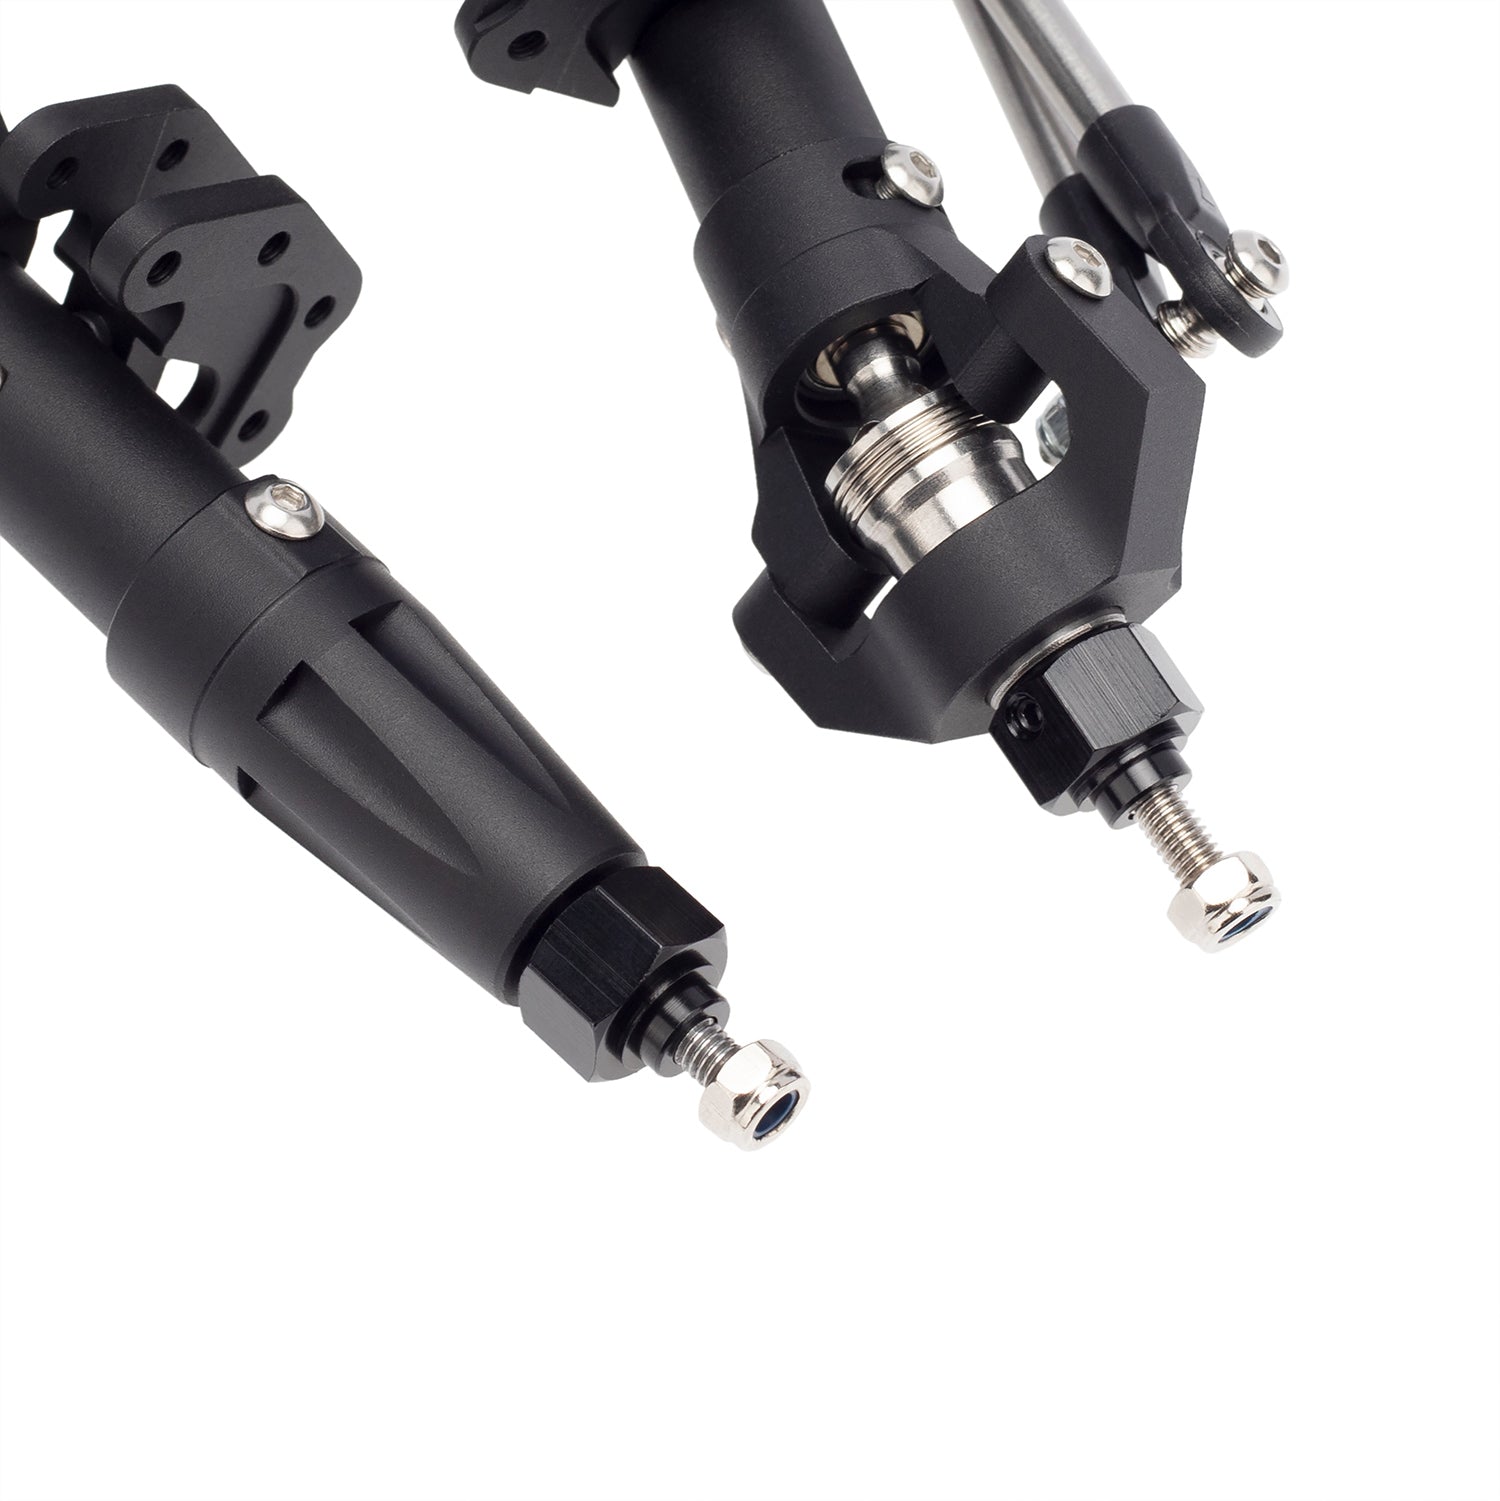 Black Metal Front Rear Axles for 1:10 Axial Wraith